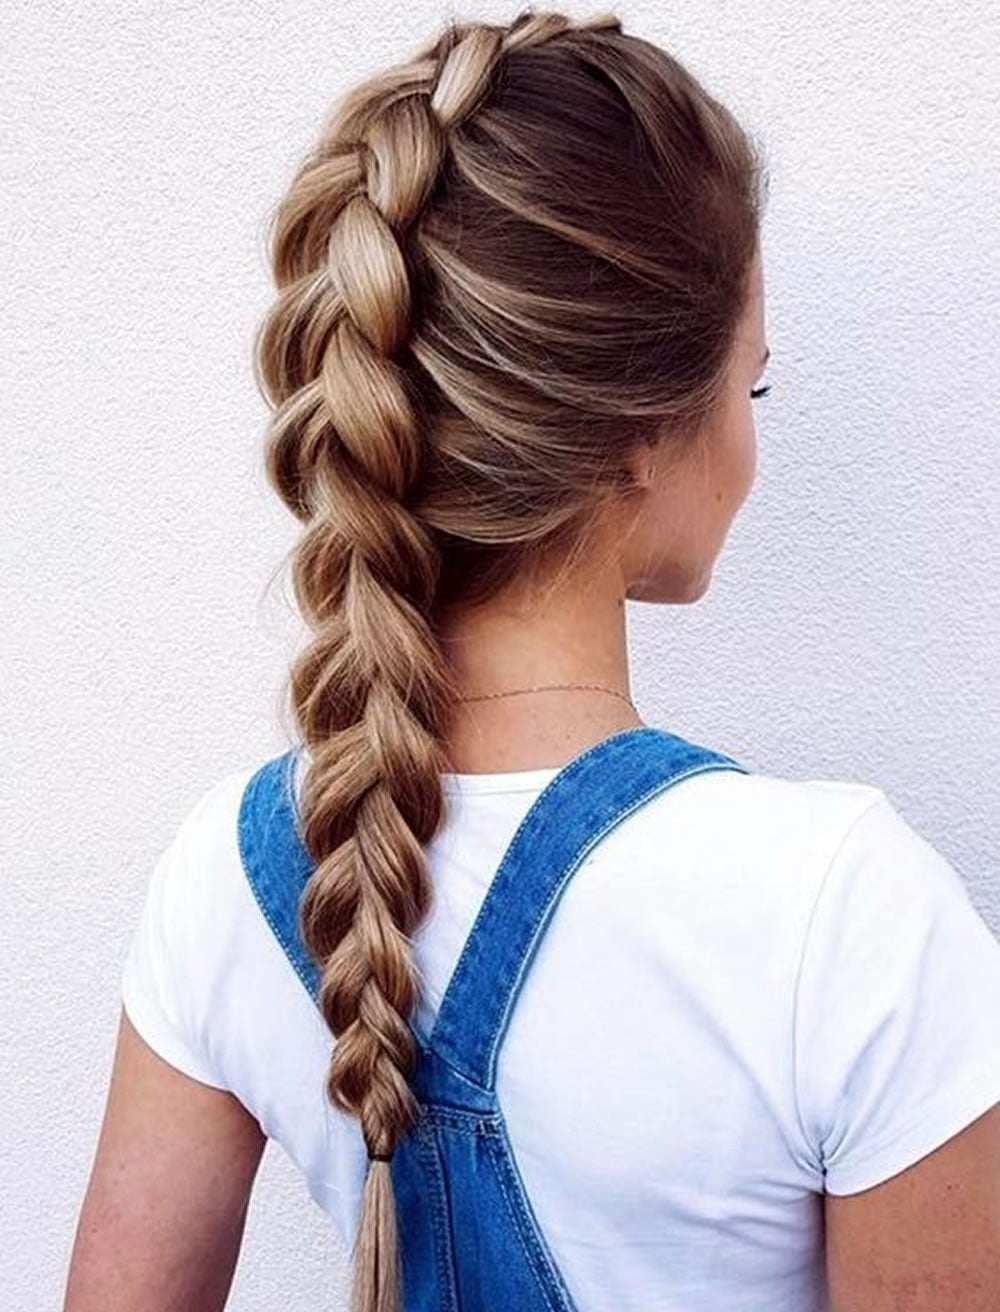 20 Cool back to school hairstyles and hair colors 2019 